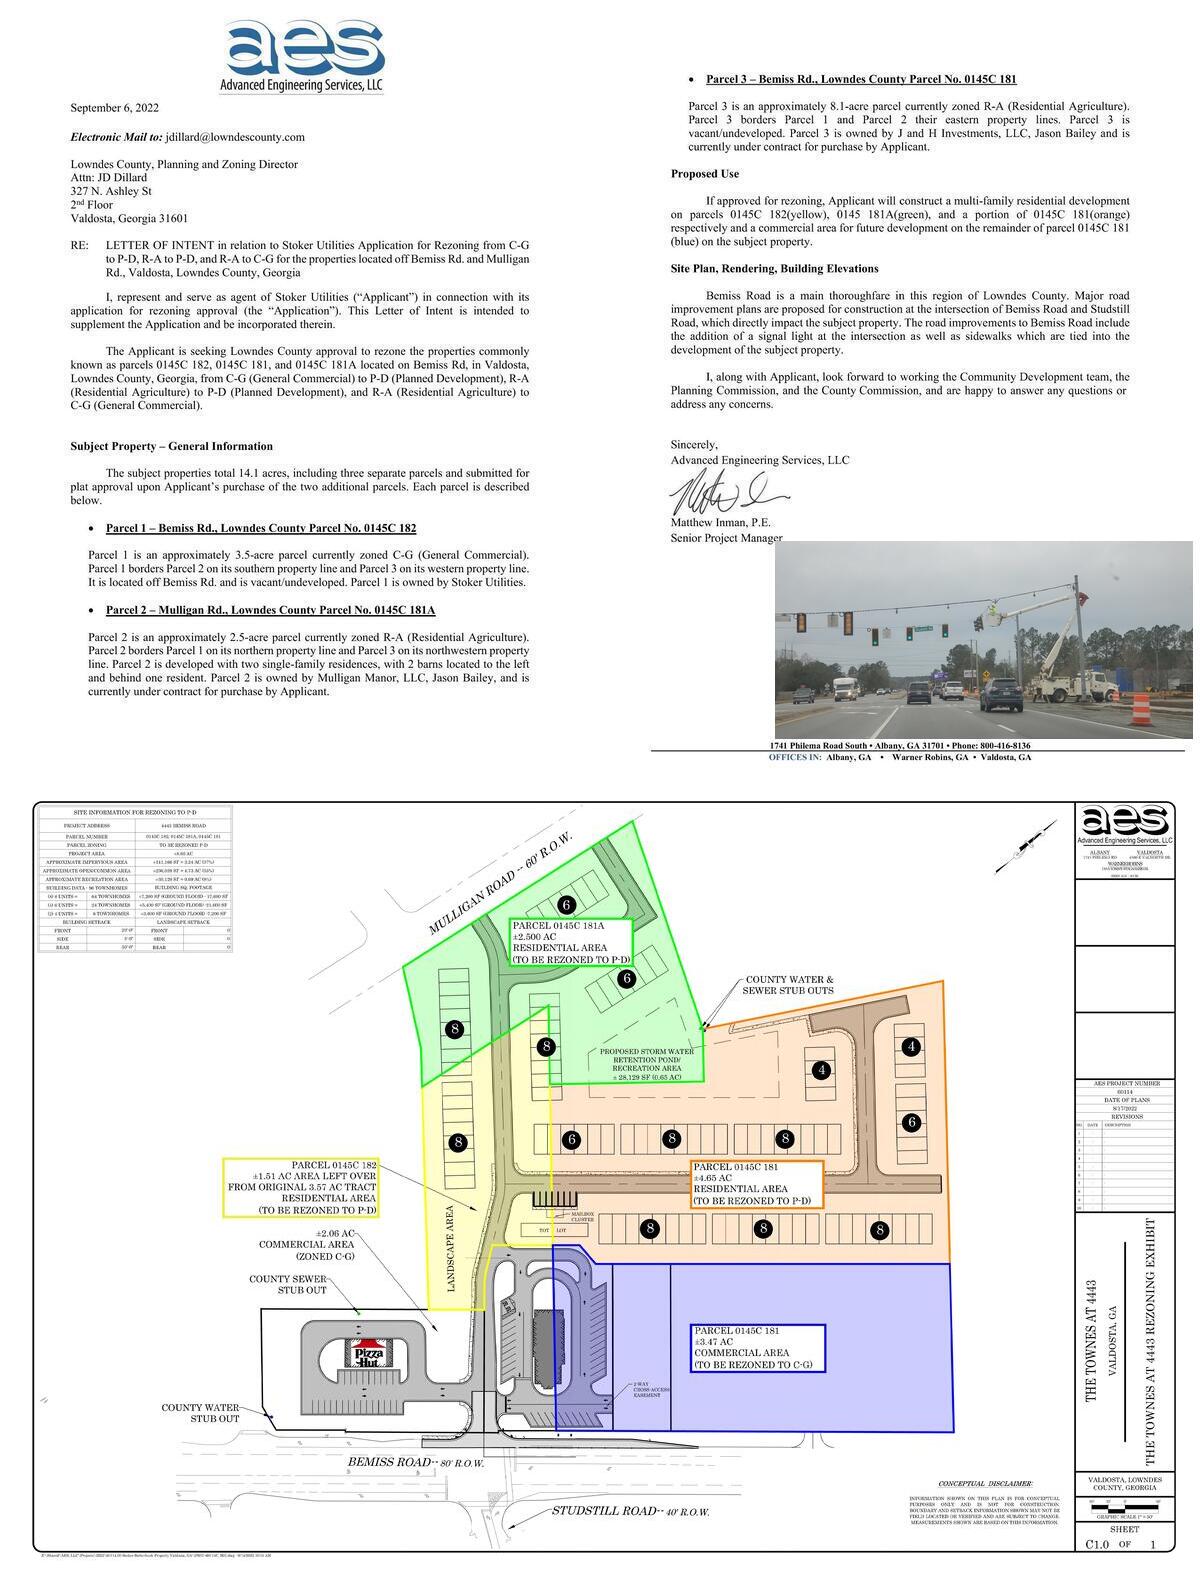 The Towns at 4443 (Bemiss Road @ Studstill Road): letter of intent and Conceptual Plan @ GLPC 2022-09-26